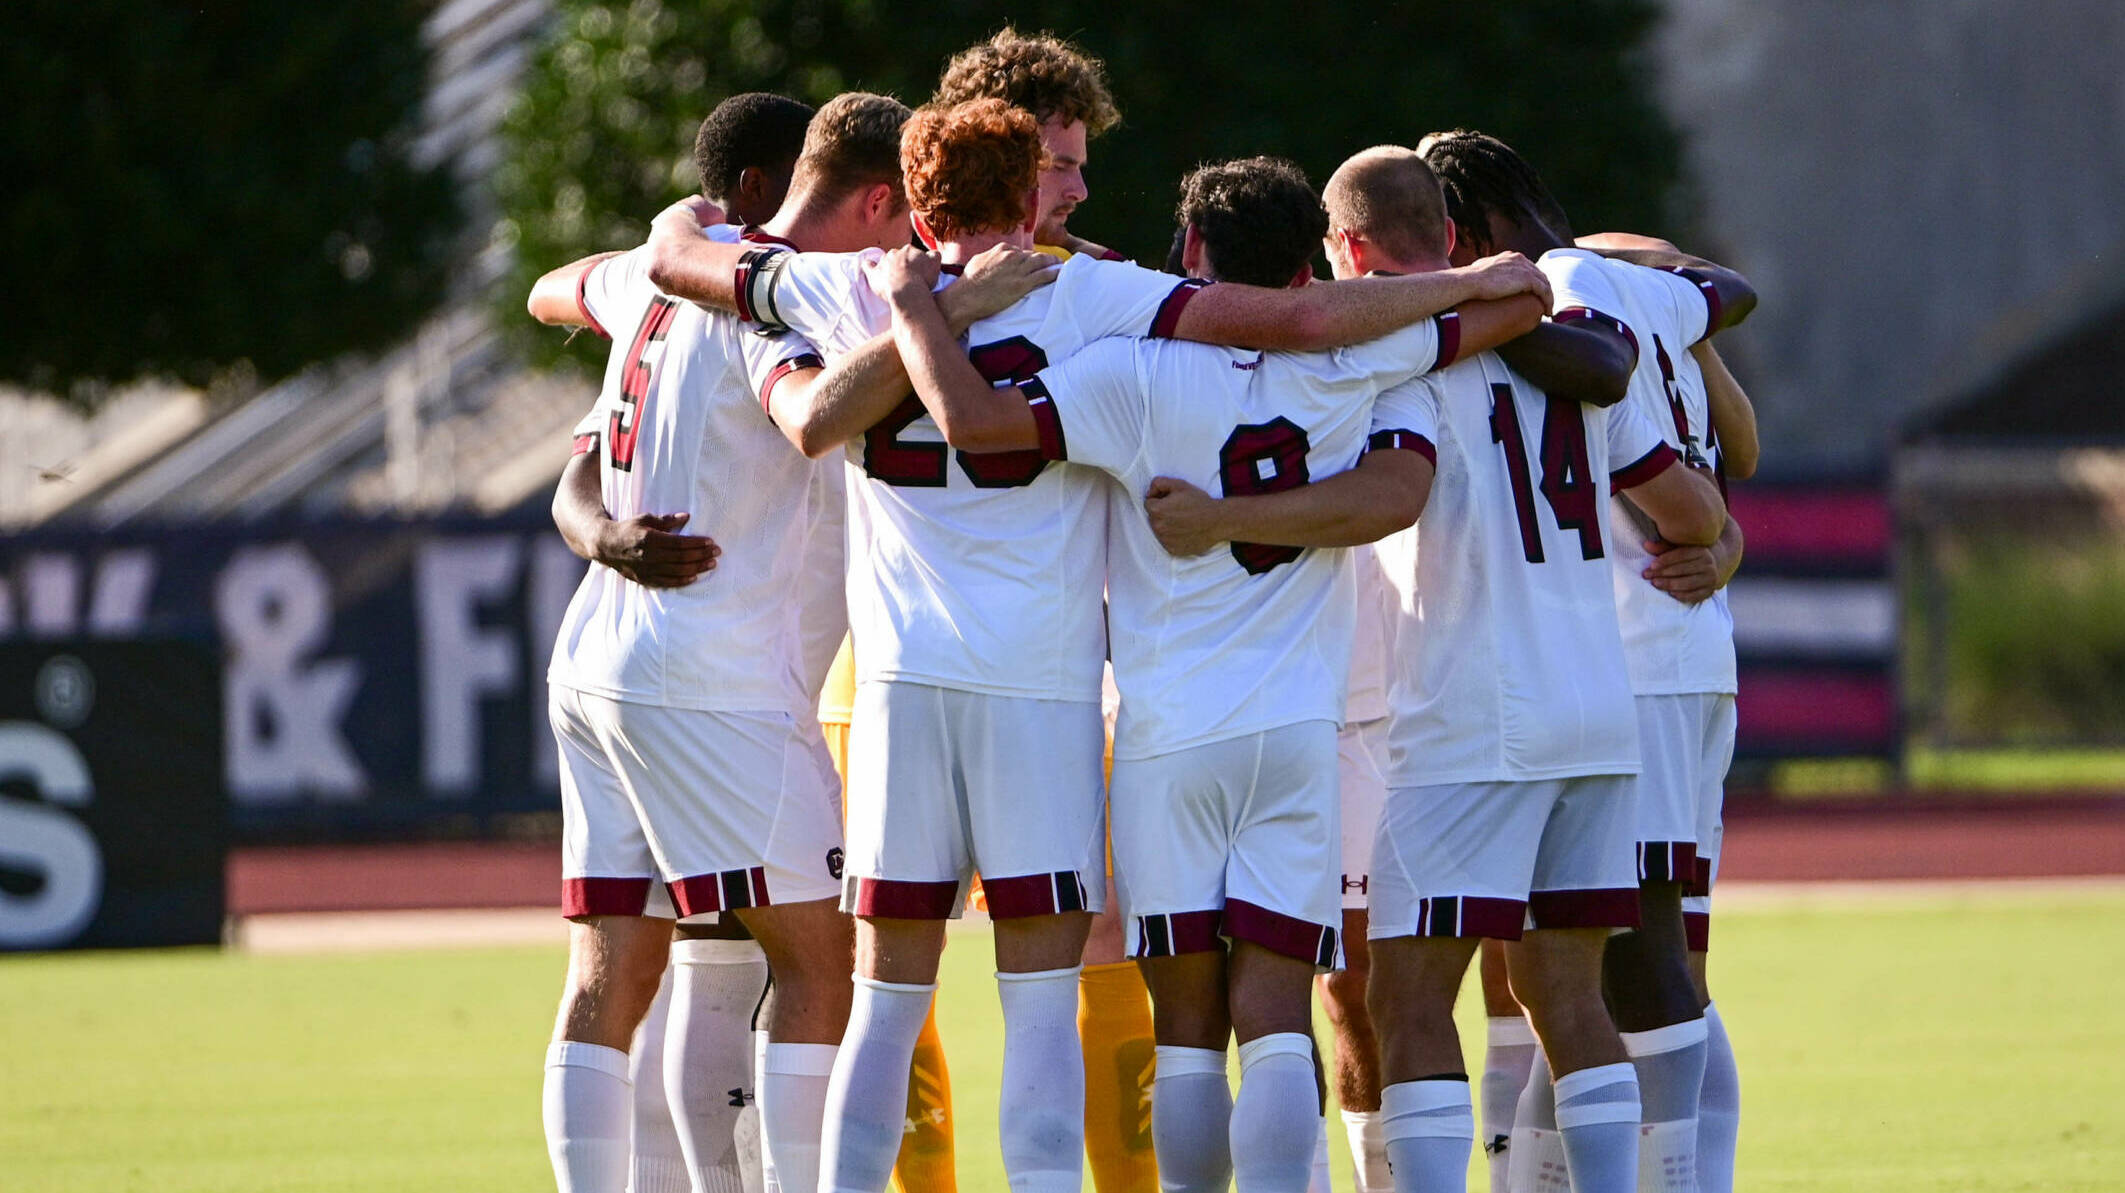 Men's Soccer Hosts Wofford for Exhibition Match Friday Night